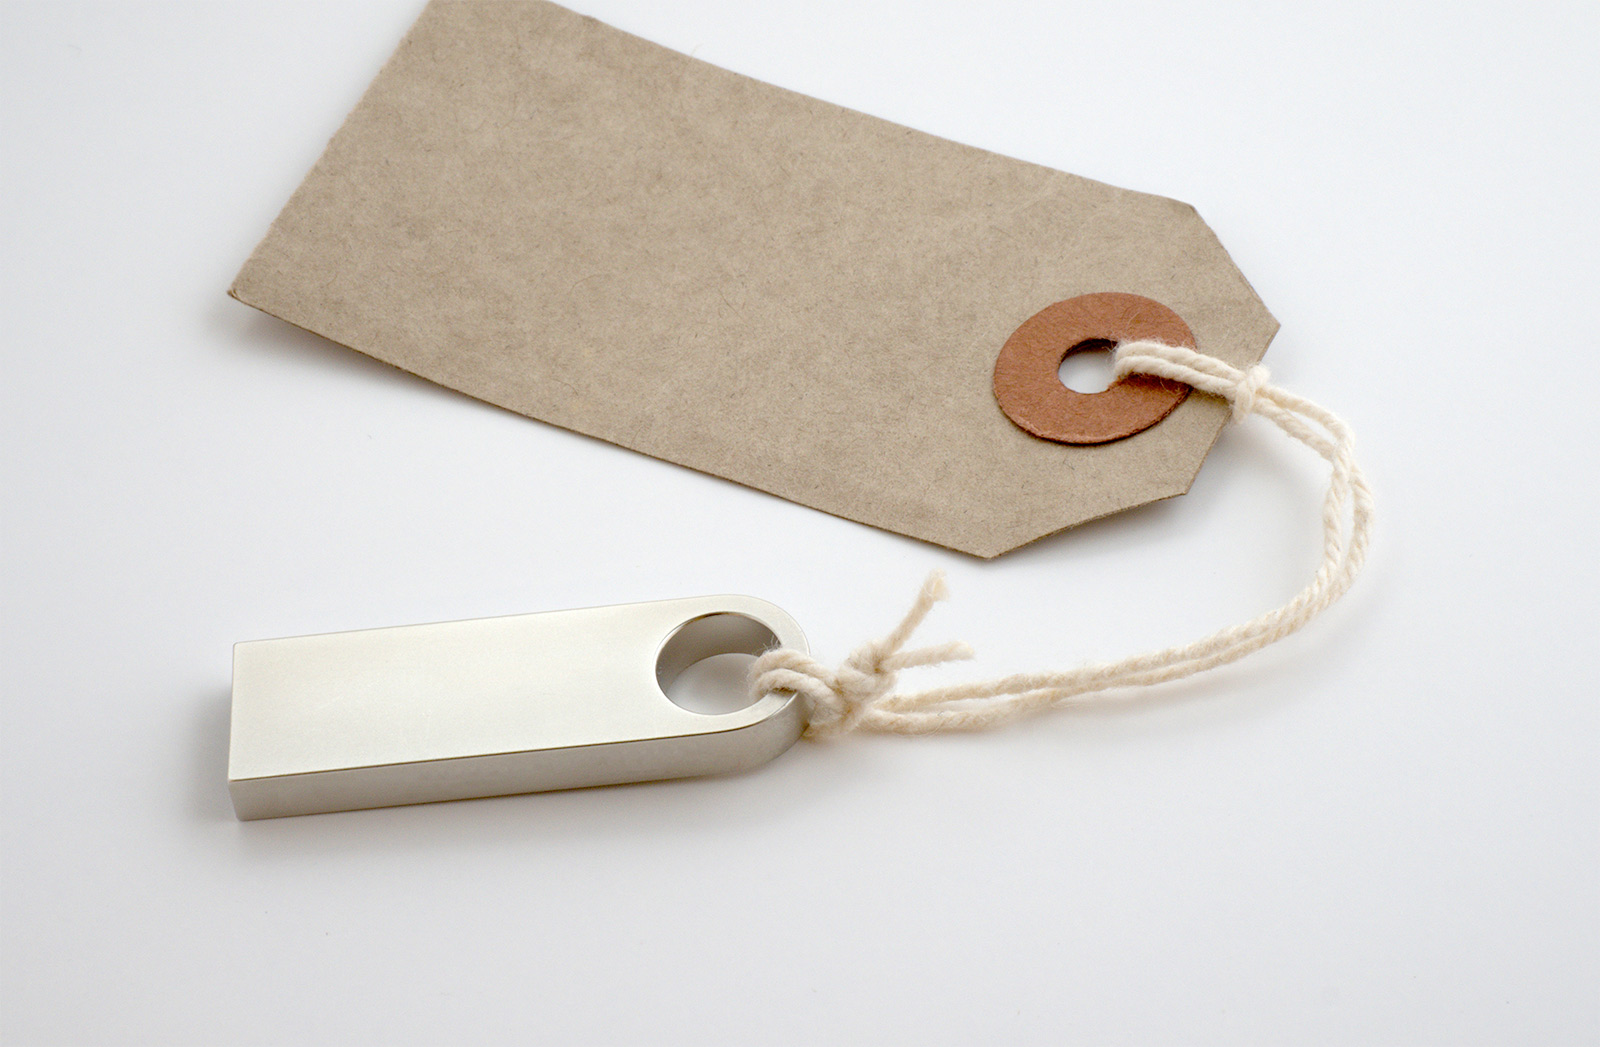 usb drive attached to a paper tag